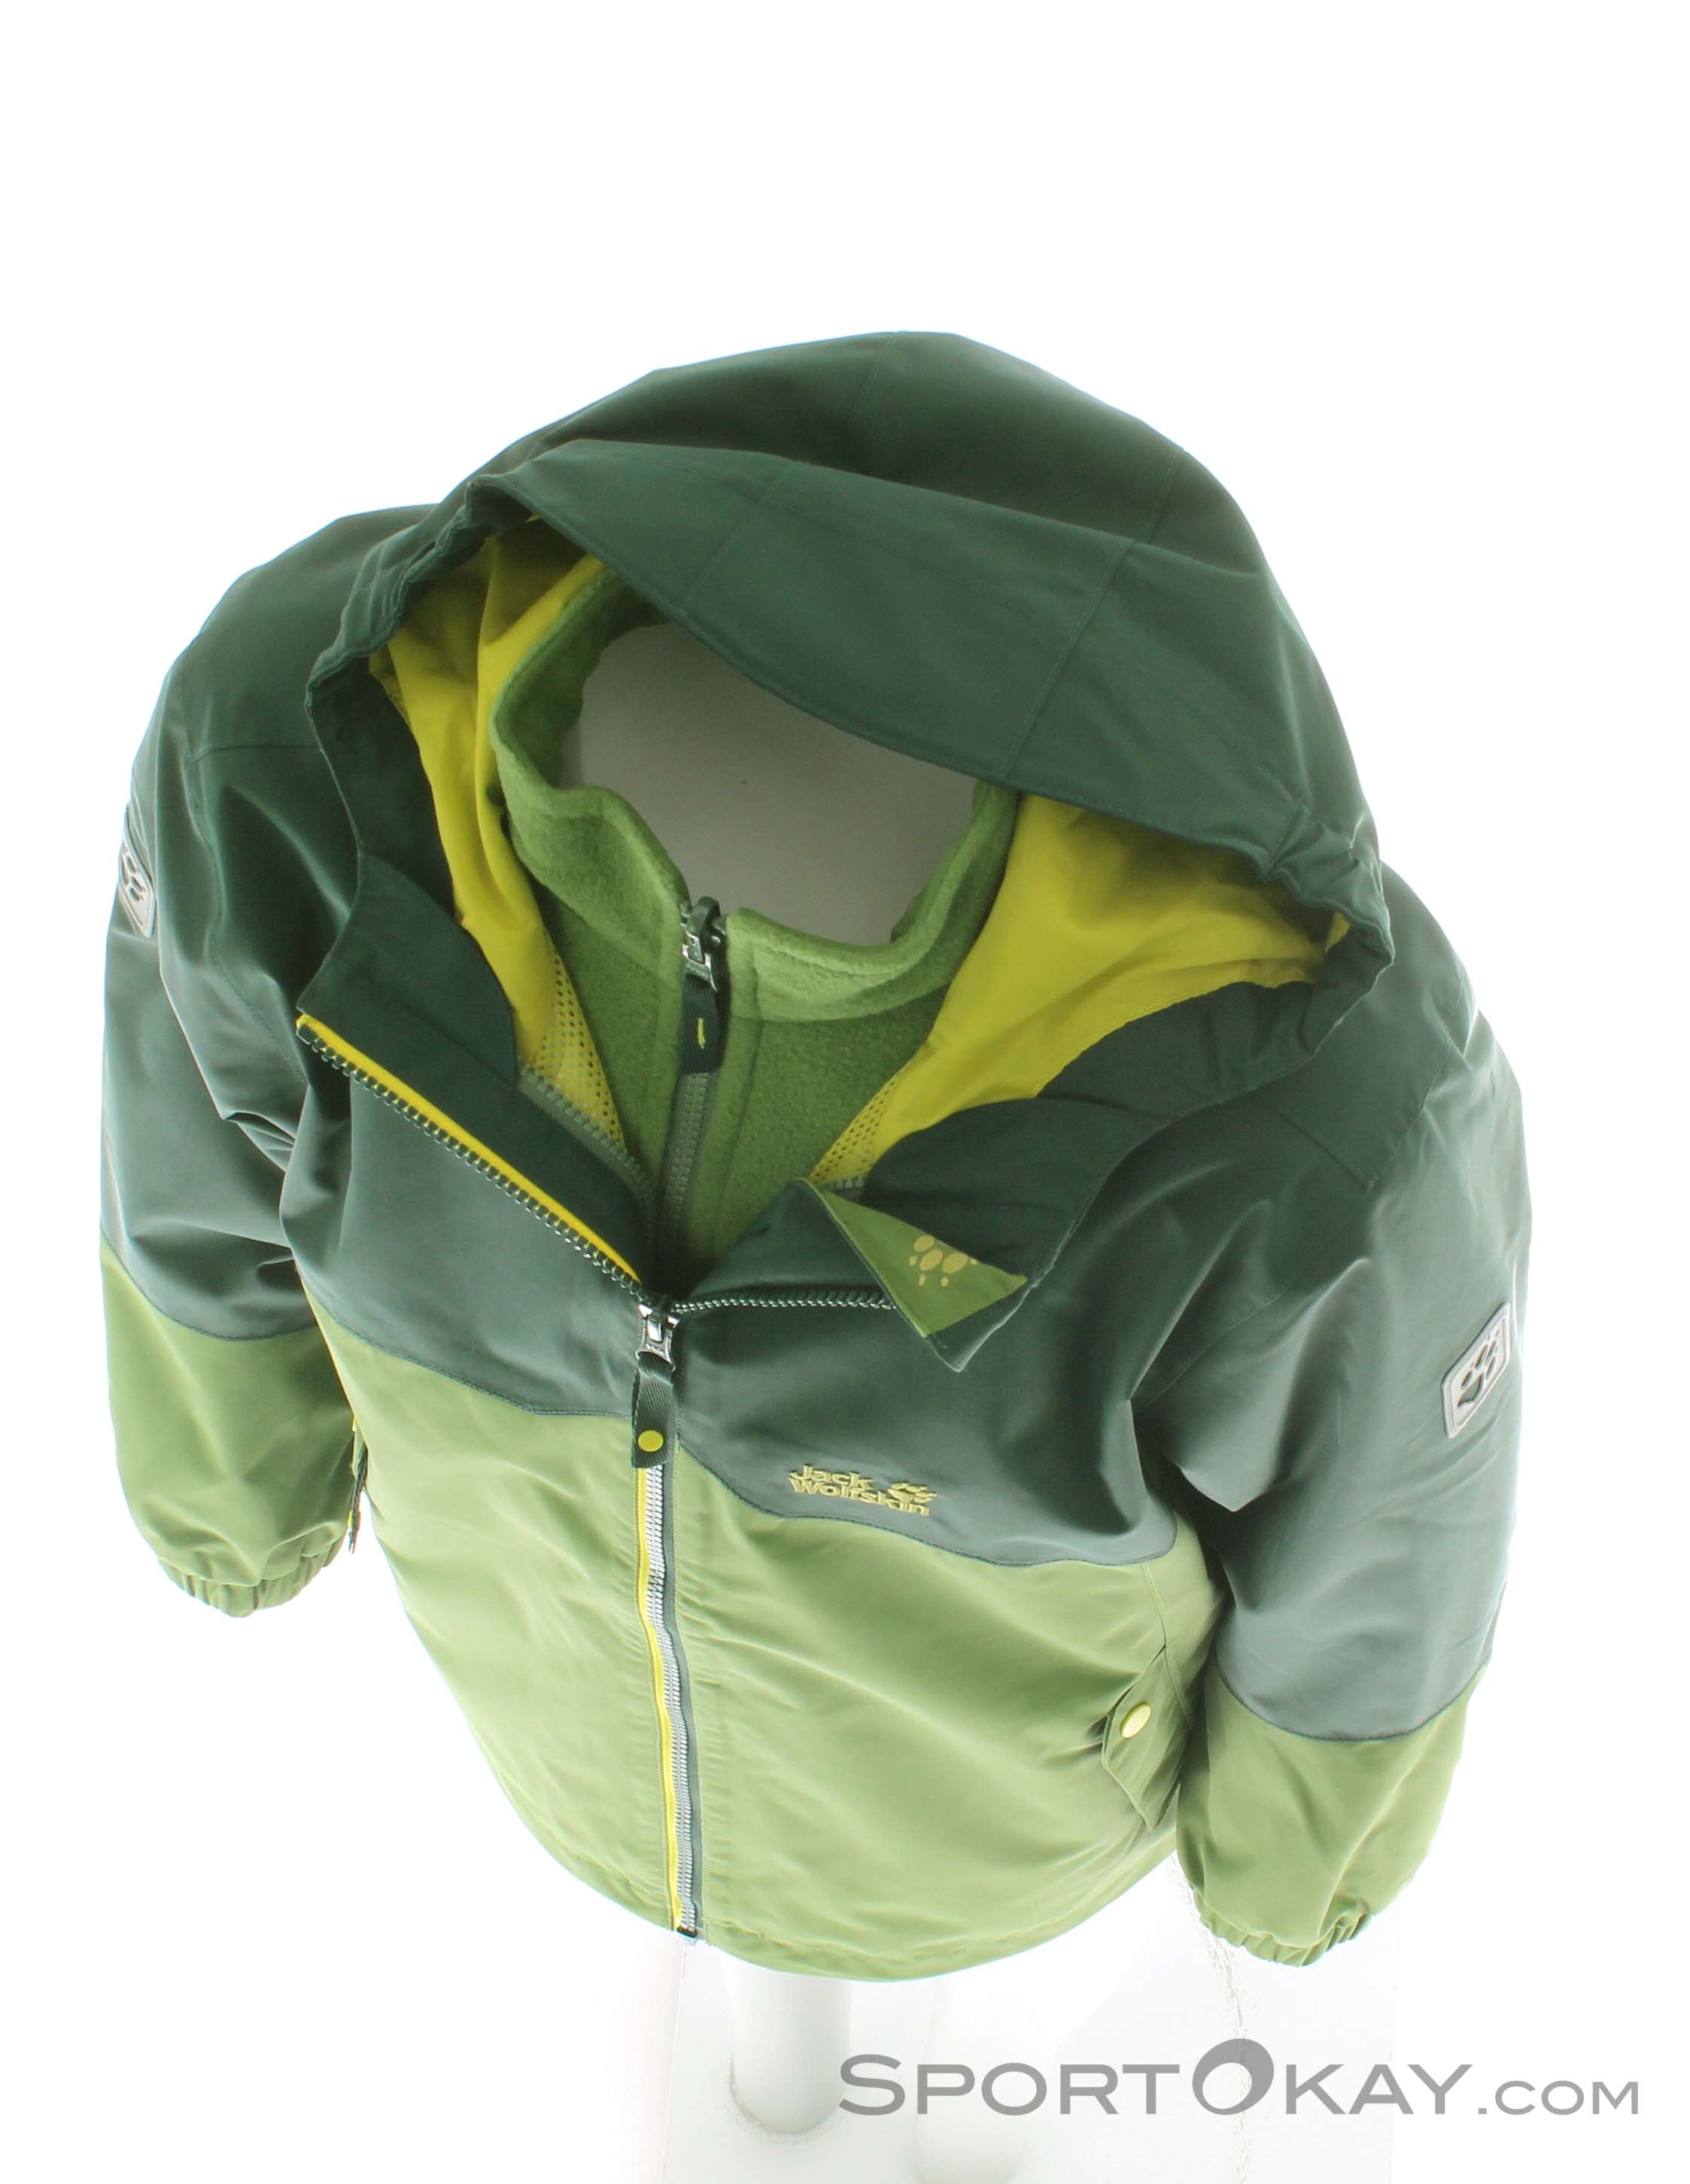 Jack Wolfskin Iceland 3in1 Boys Outdoor Jacket - Jackets - Outdoor Clothing  - Outdoor - All